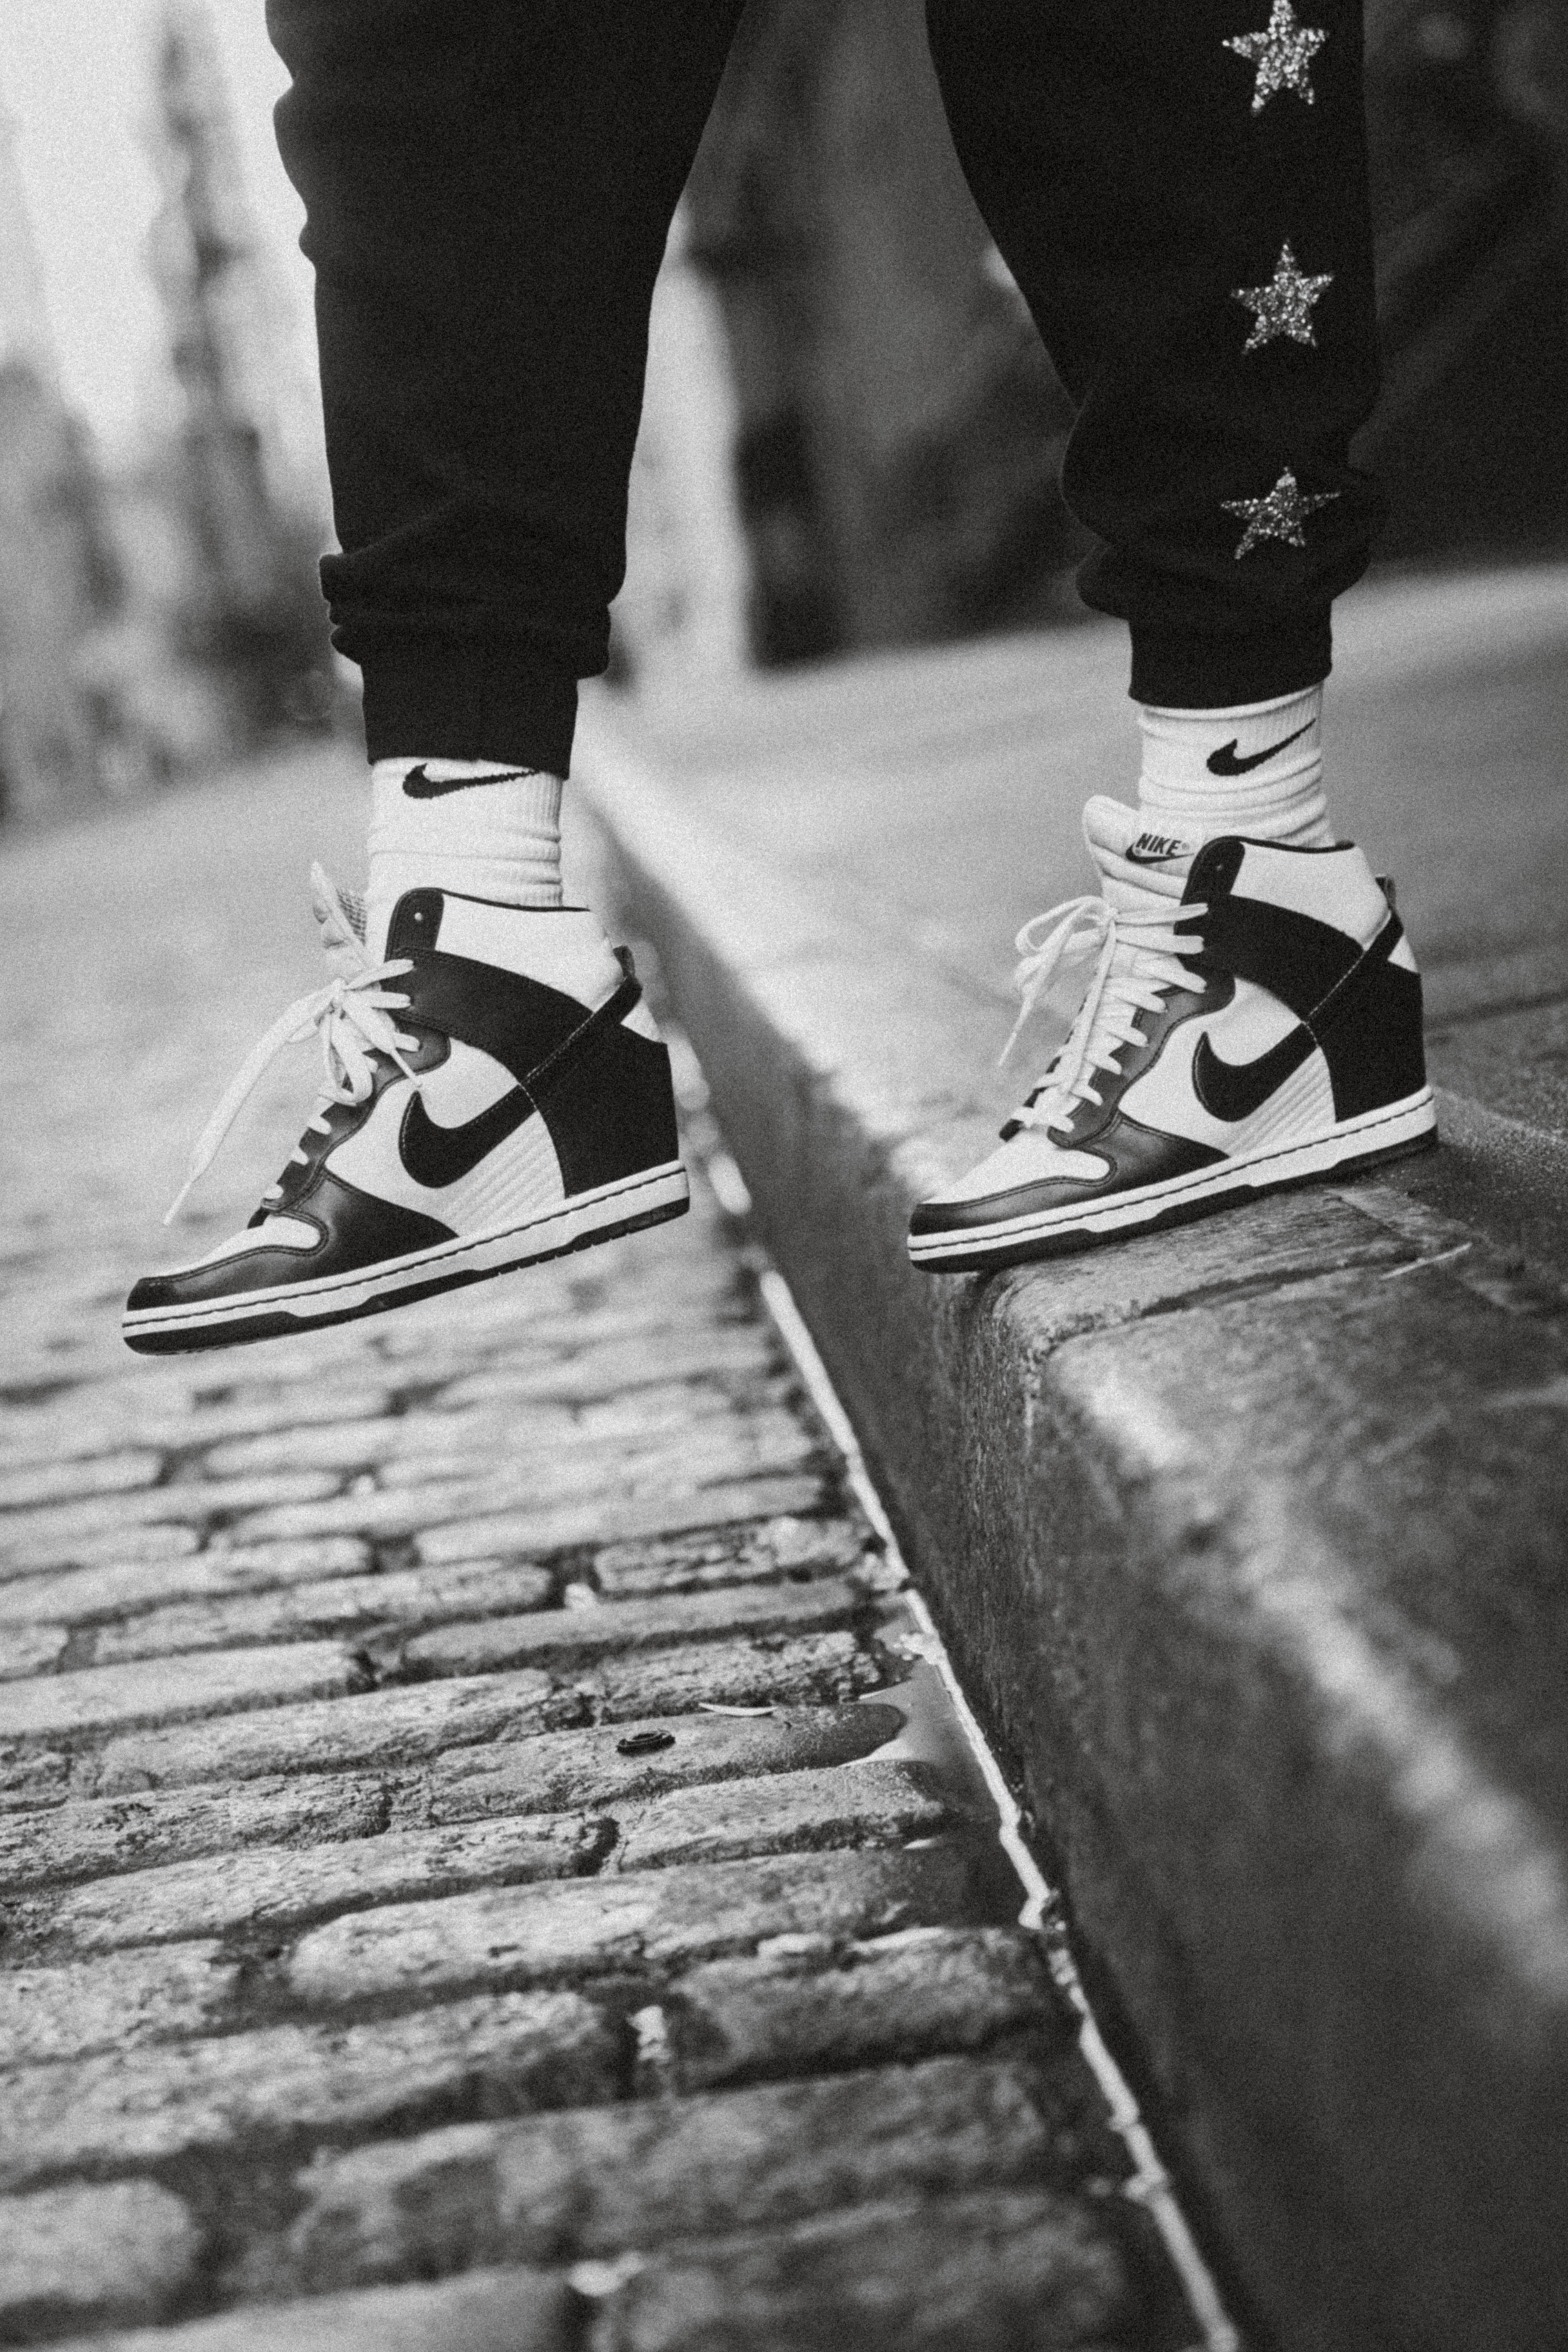 miscellanea, miscellaneous, legs, sneakers, bw, chb, style, step